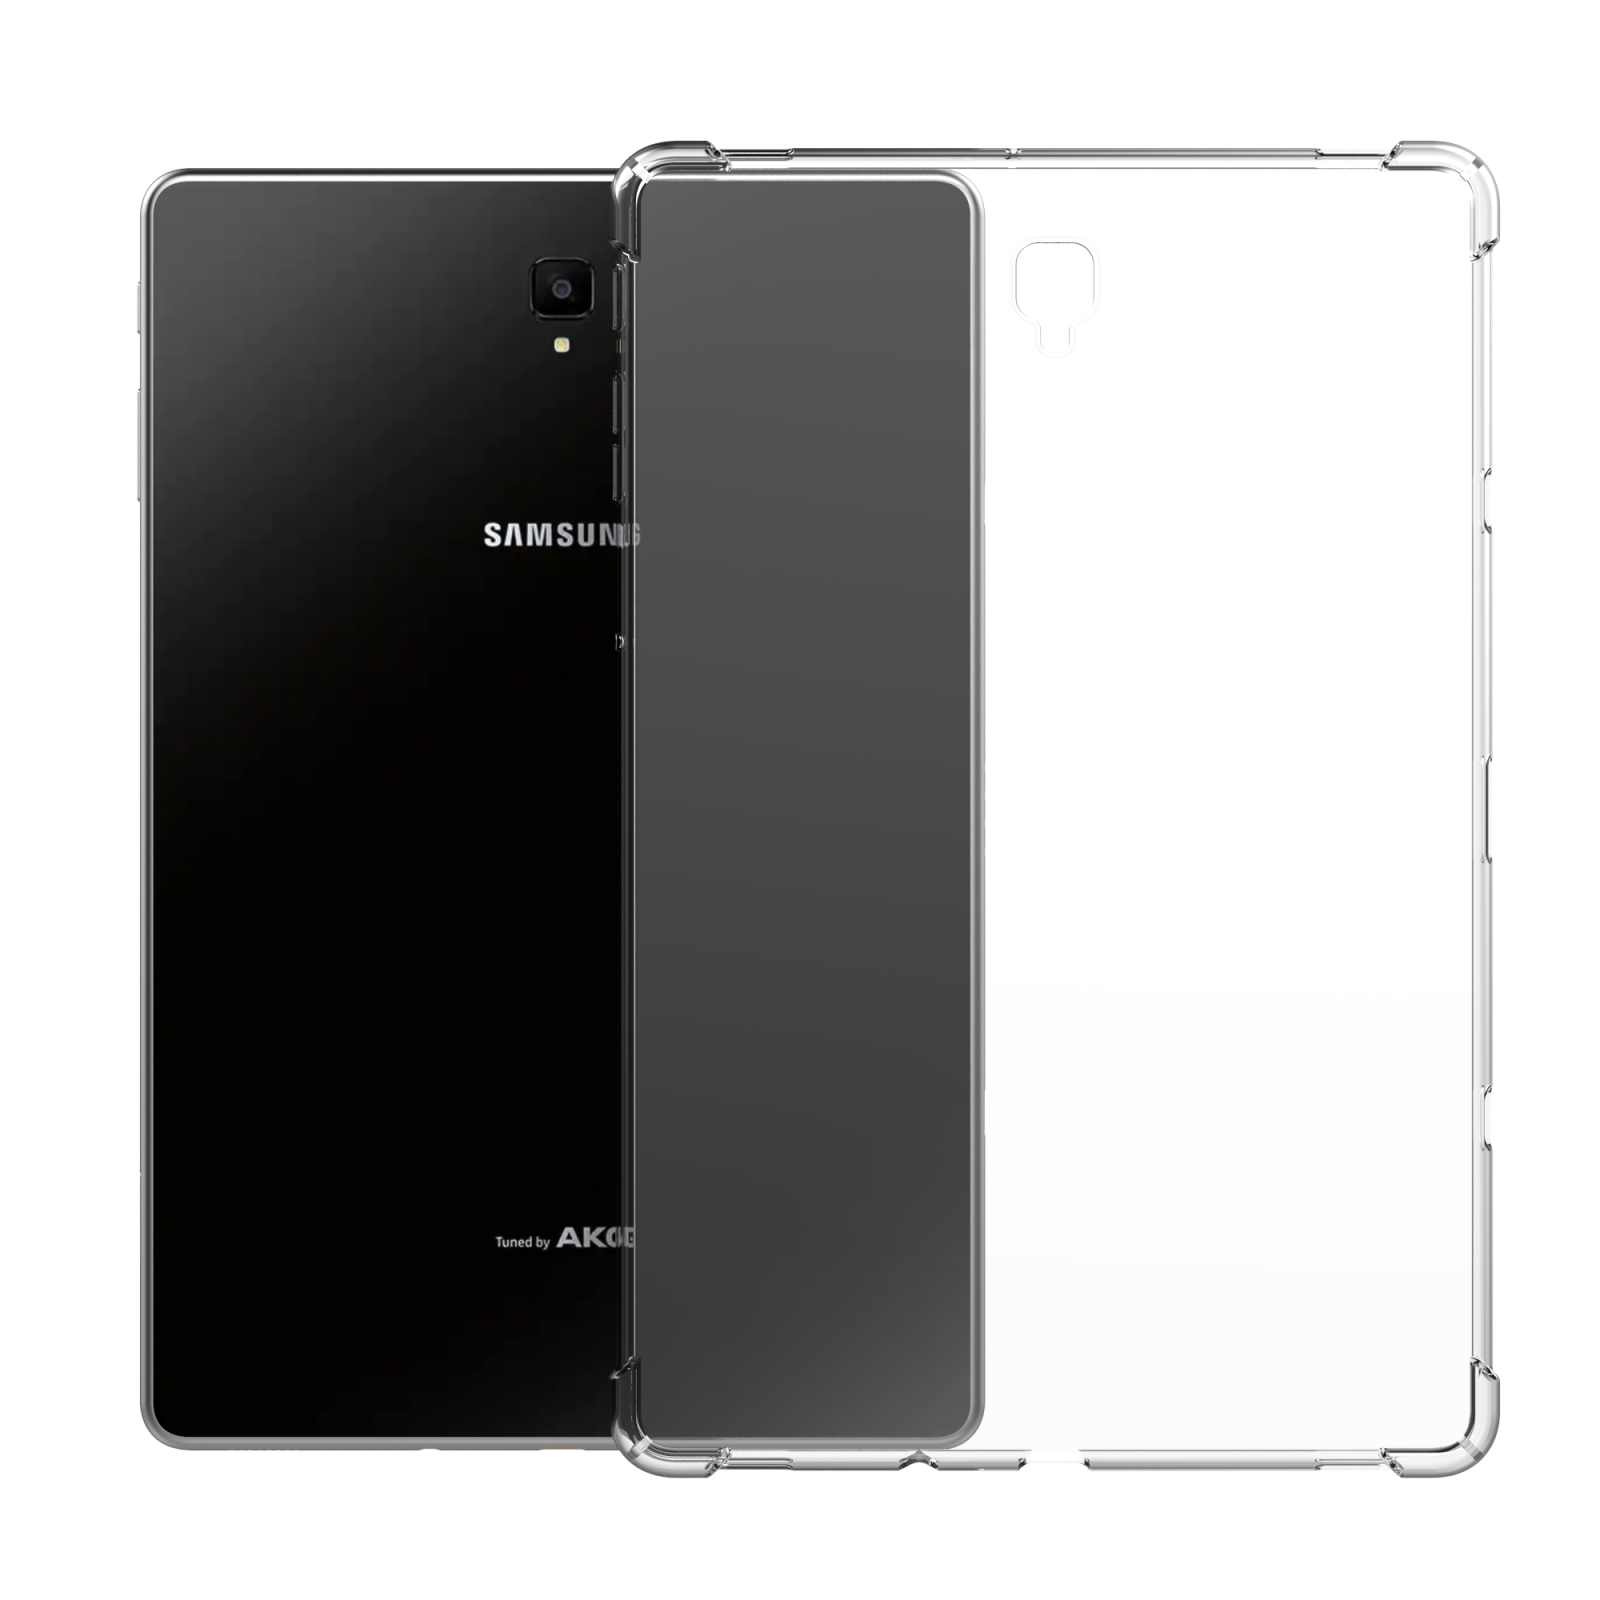 Shockproof Clear  For samsung GalyxyTab A S6 Lite  P610 P615 10.4 inch S6 T860 T865 10.5 S7 2020 T870 T875 11 S7 Plus T970 T975 12.4  A7 T505 S4 T830 t835 10.5 S5E 2019 T720 T725 10.5 inch  Kids Shockproof TPU Case Cover Safe  Cover Casing